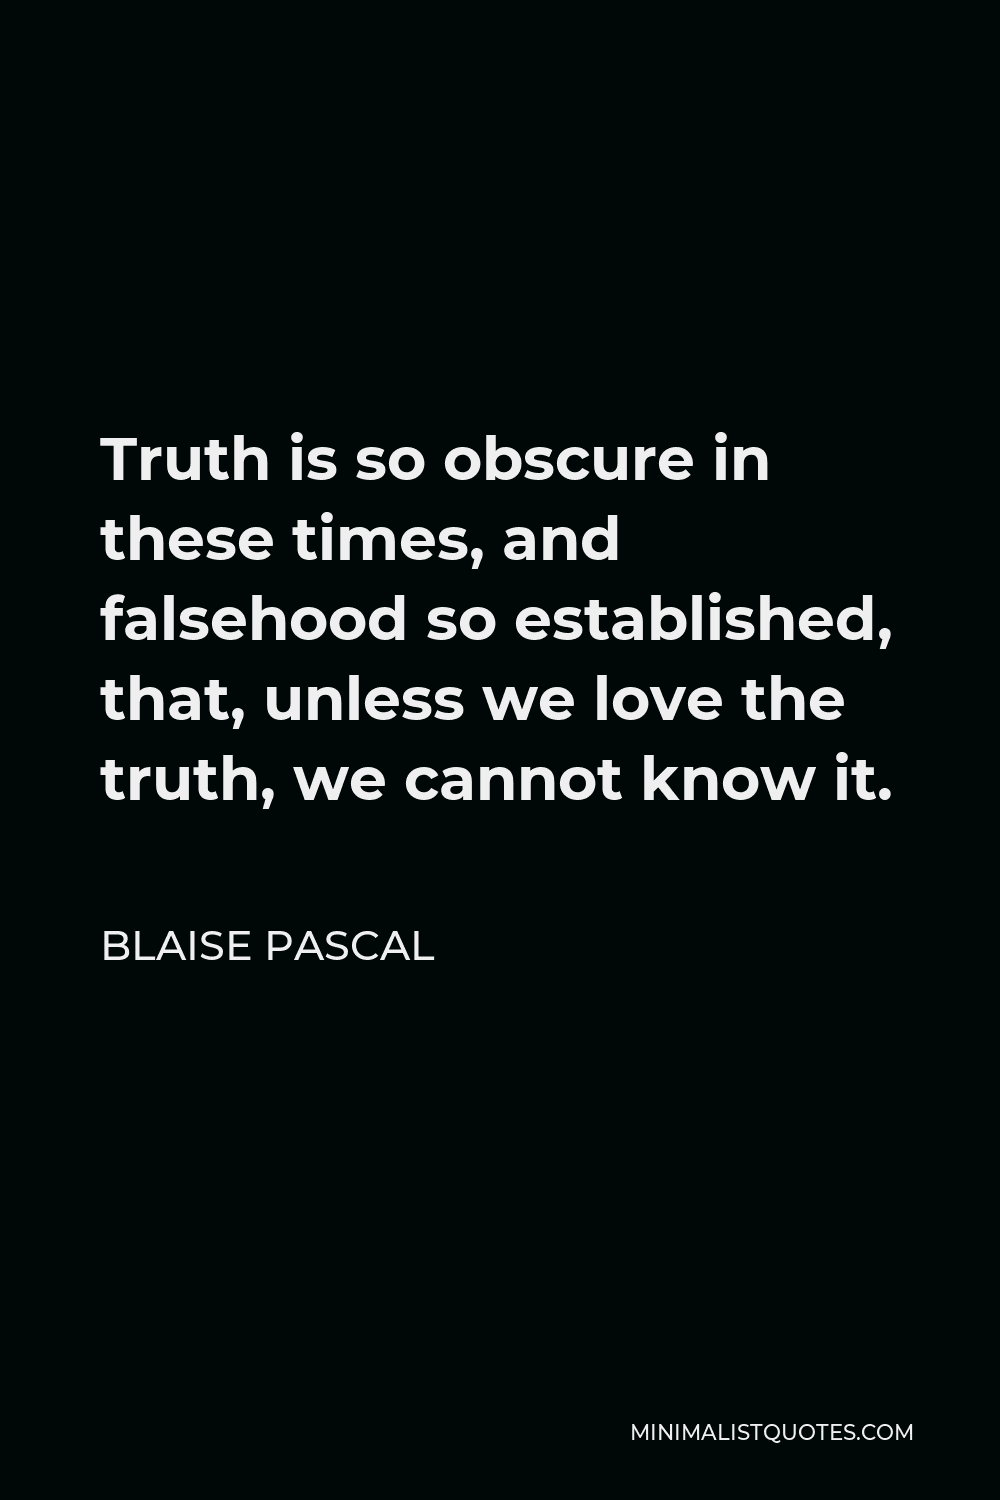 Blaise Pascal Quote - Truth is so obscure in these times, and falsehood so established, that, unless we love the truth, we cannot know it.